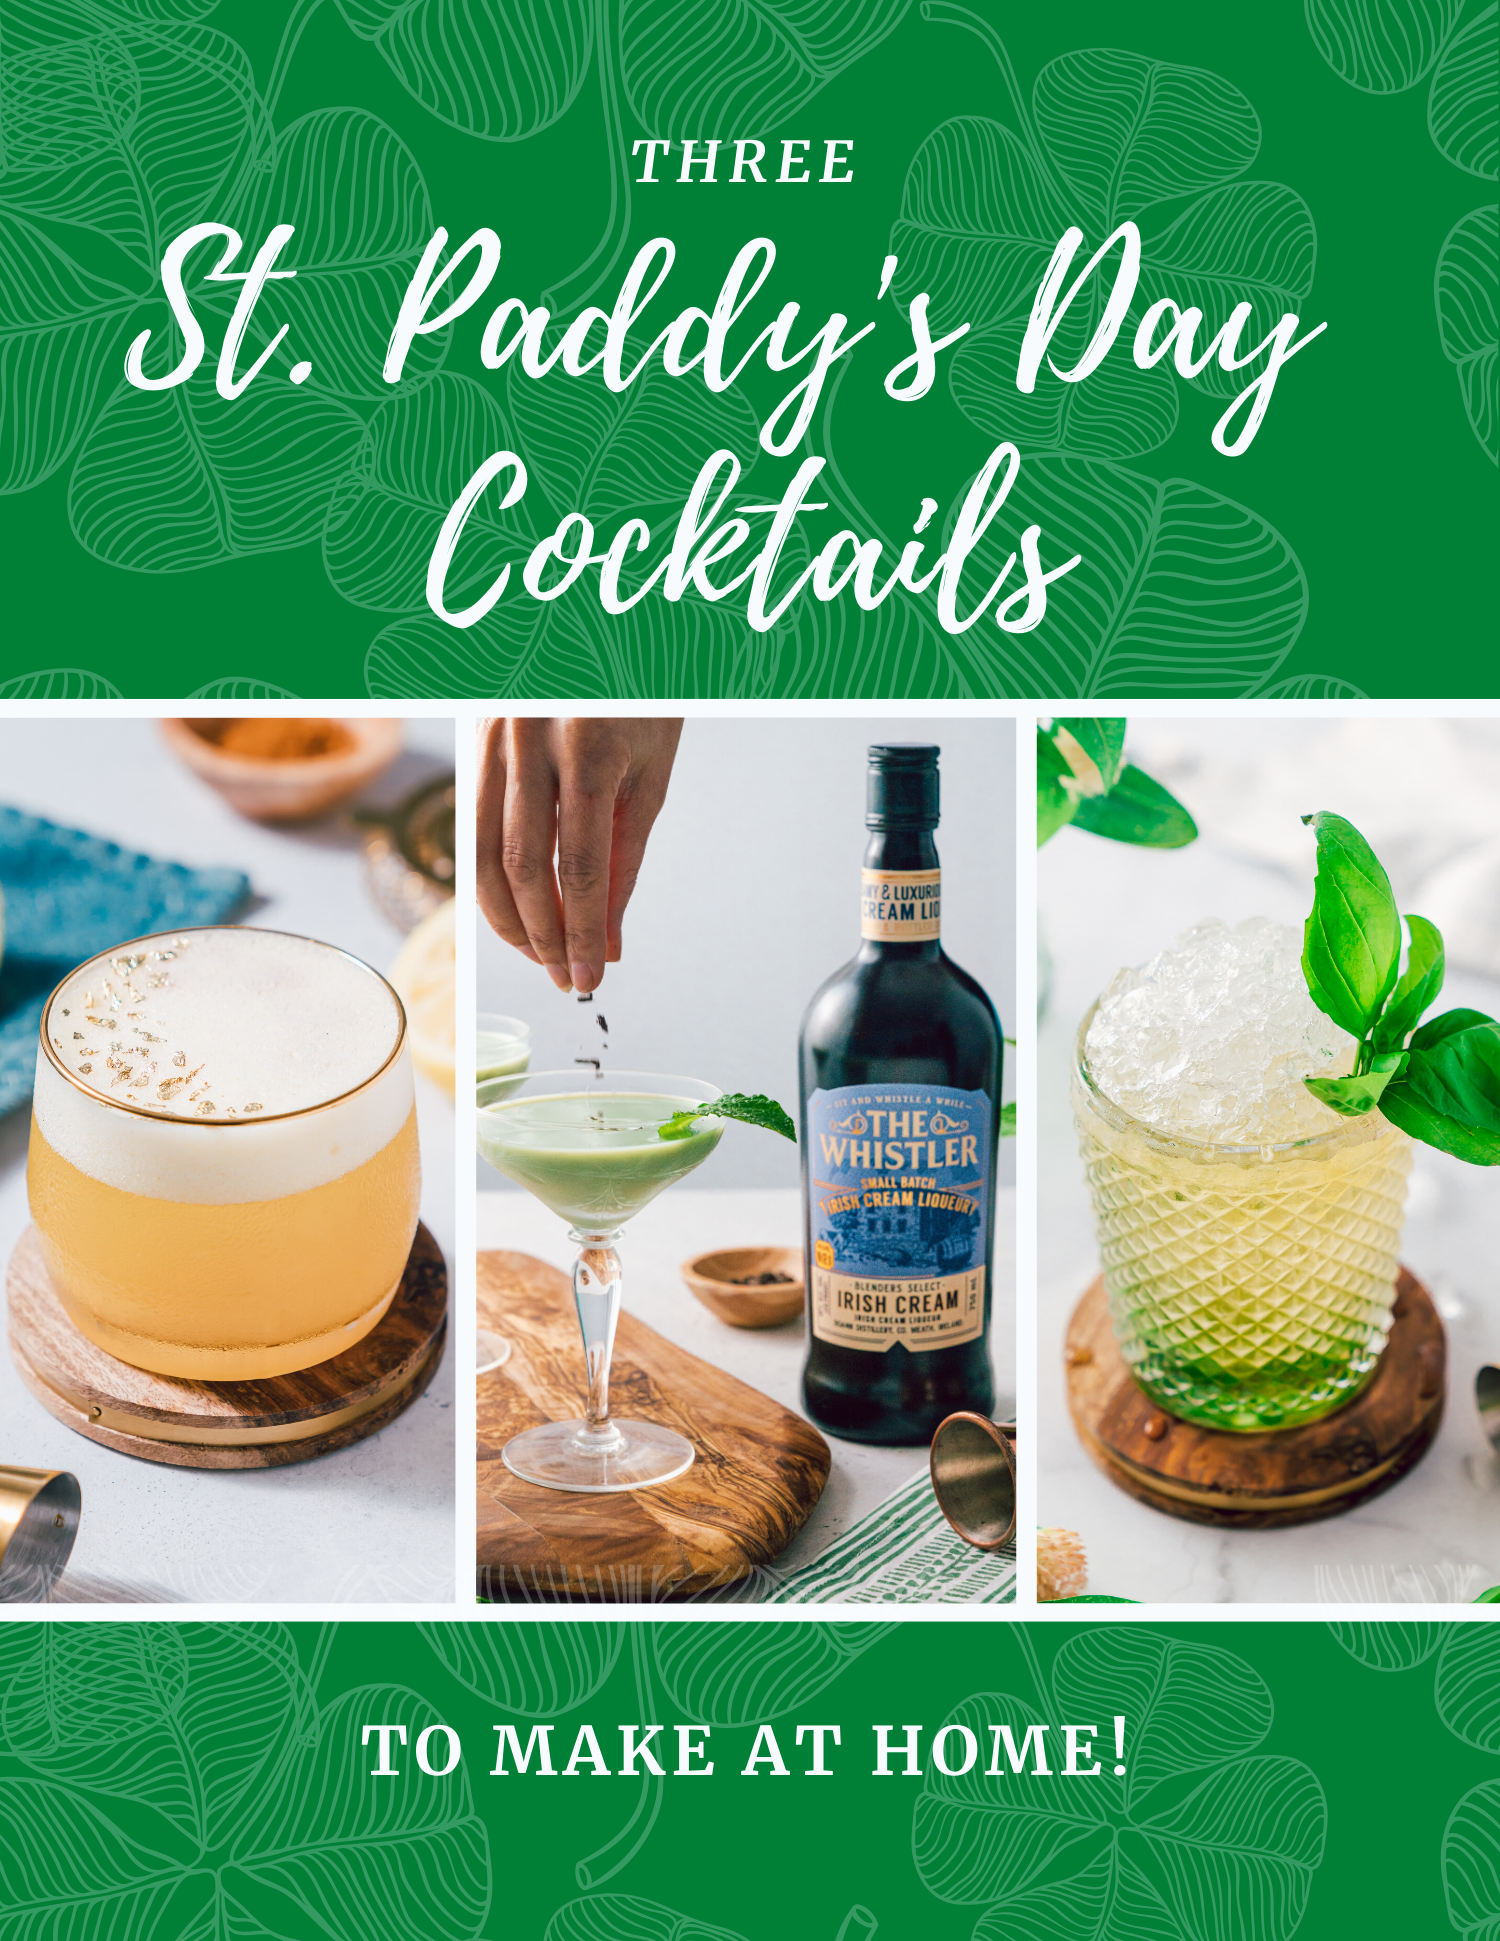 st. paddy's day cocktails